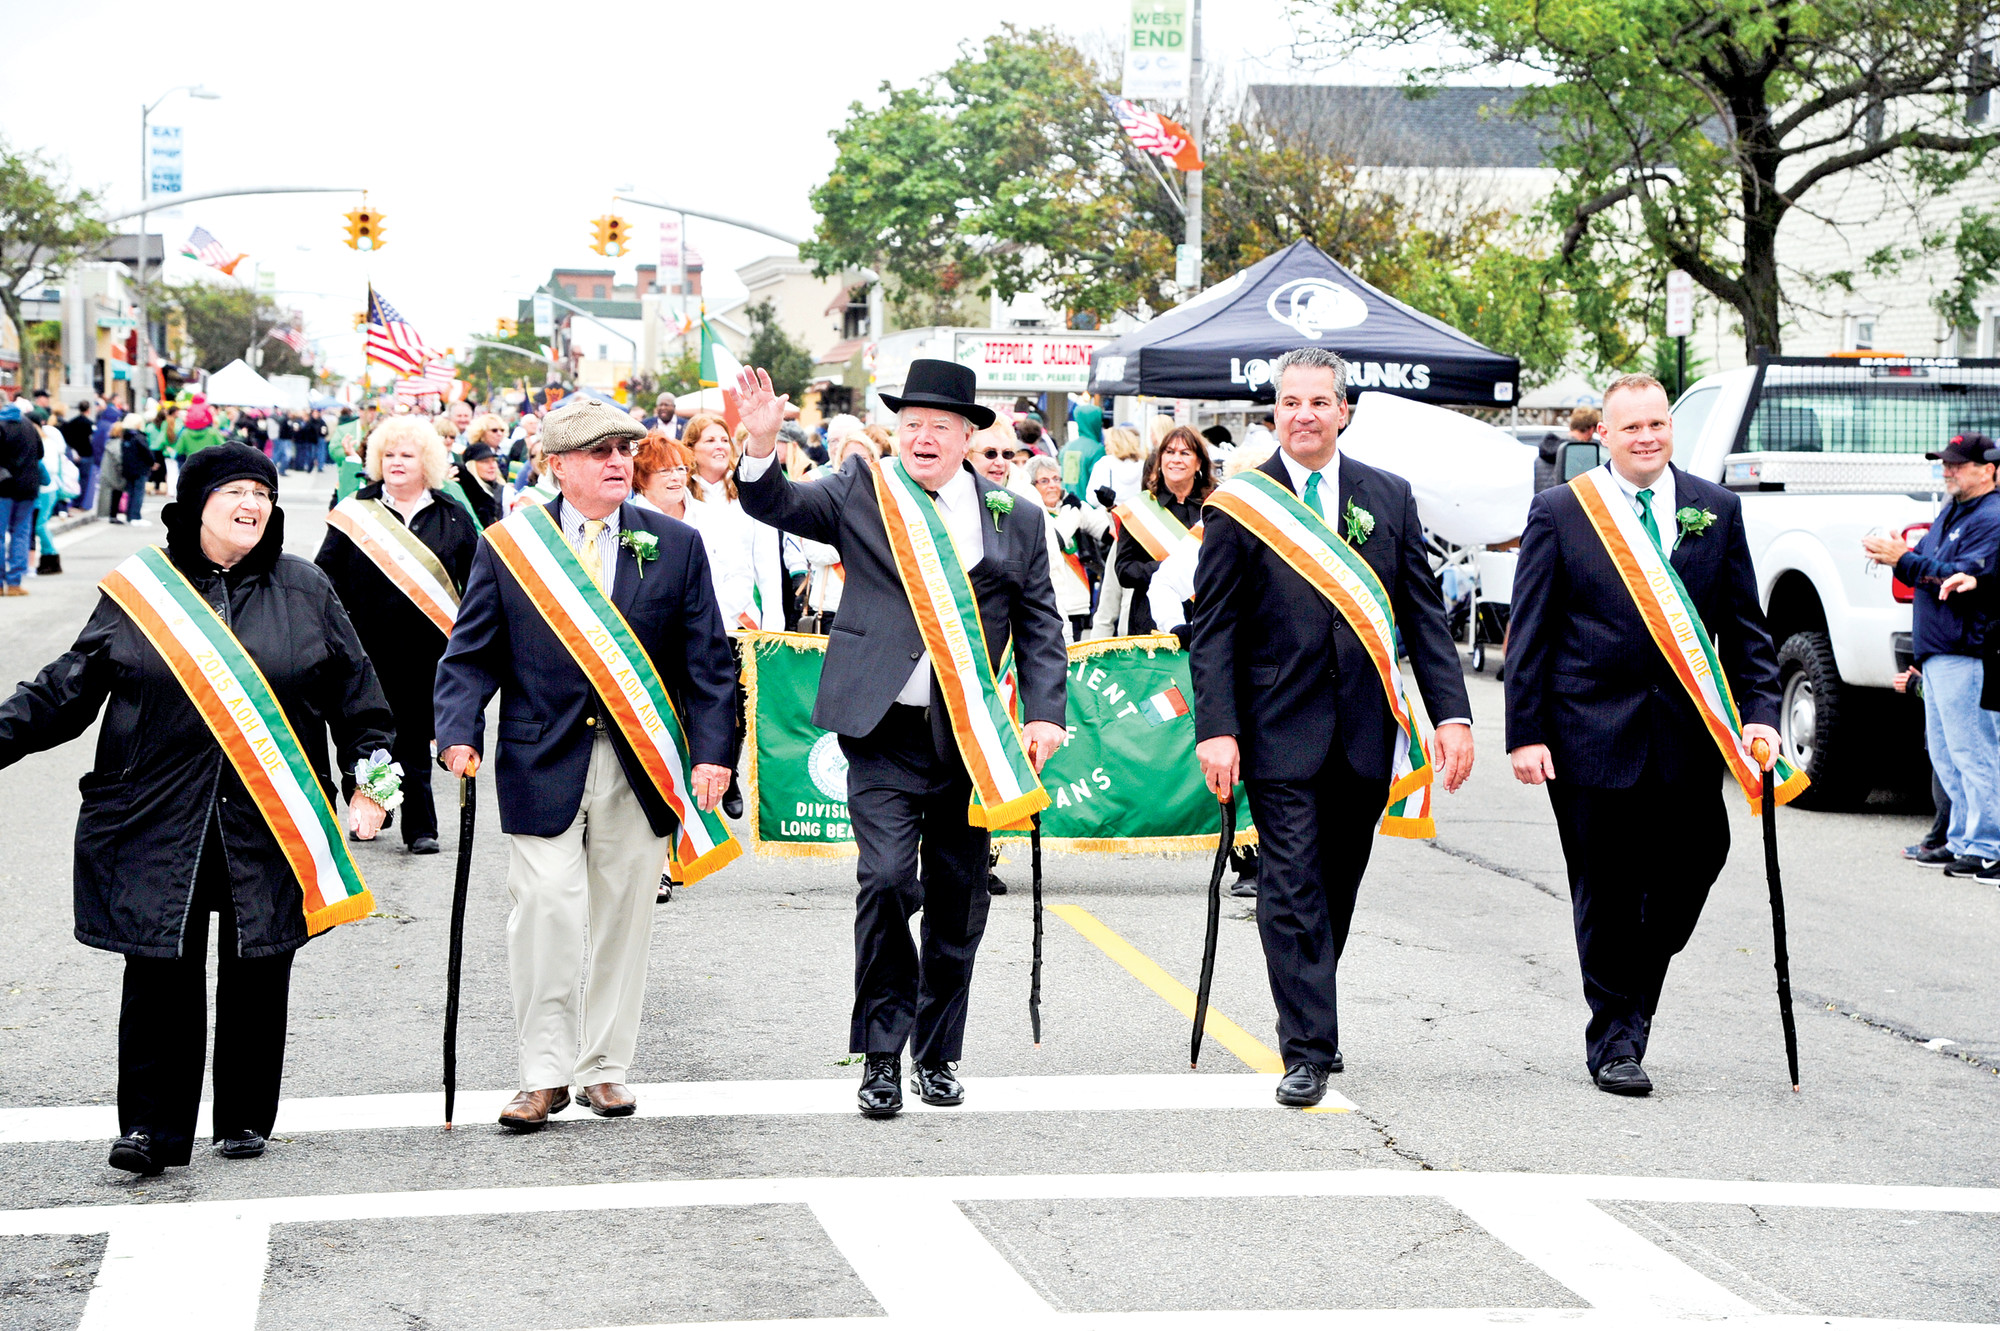 Donovan Berthoud/Herald
Grand Marshal William “Billy” Callahan, center, marched with the Ancient Order of Hibernians in the 26th annual Saint Brendan the Navigator Long Beach Irish Day Parade last Saturday.